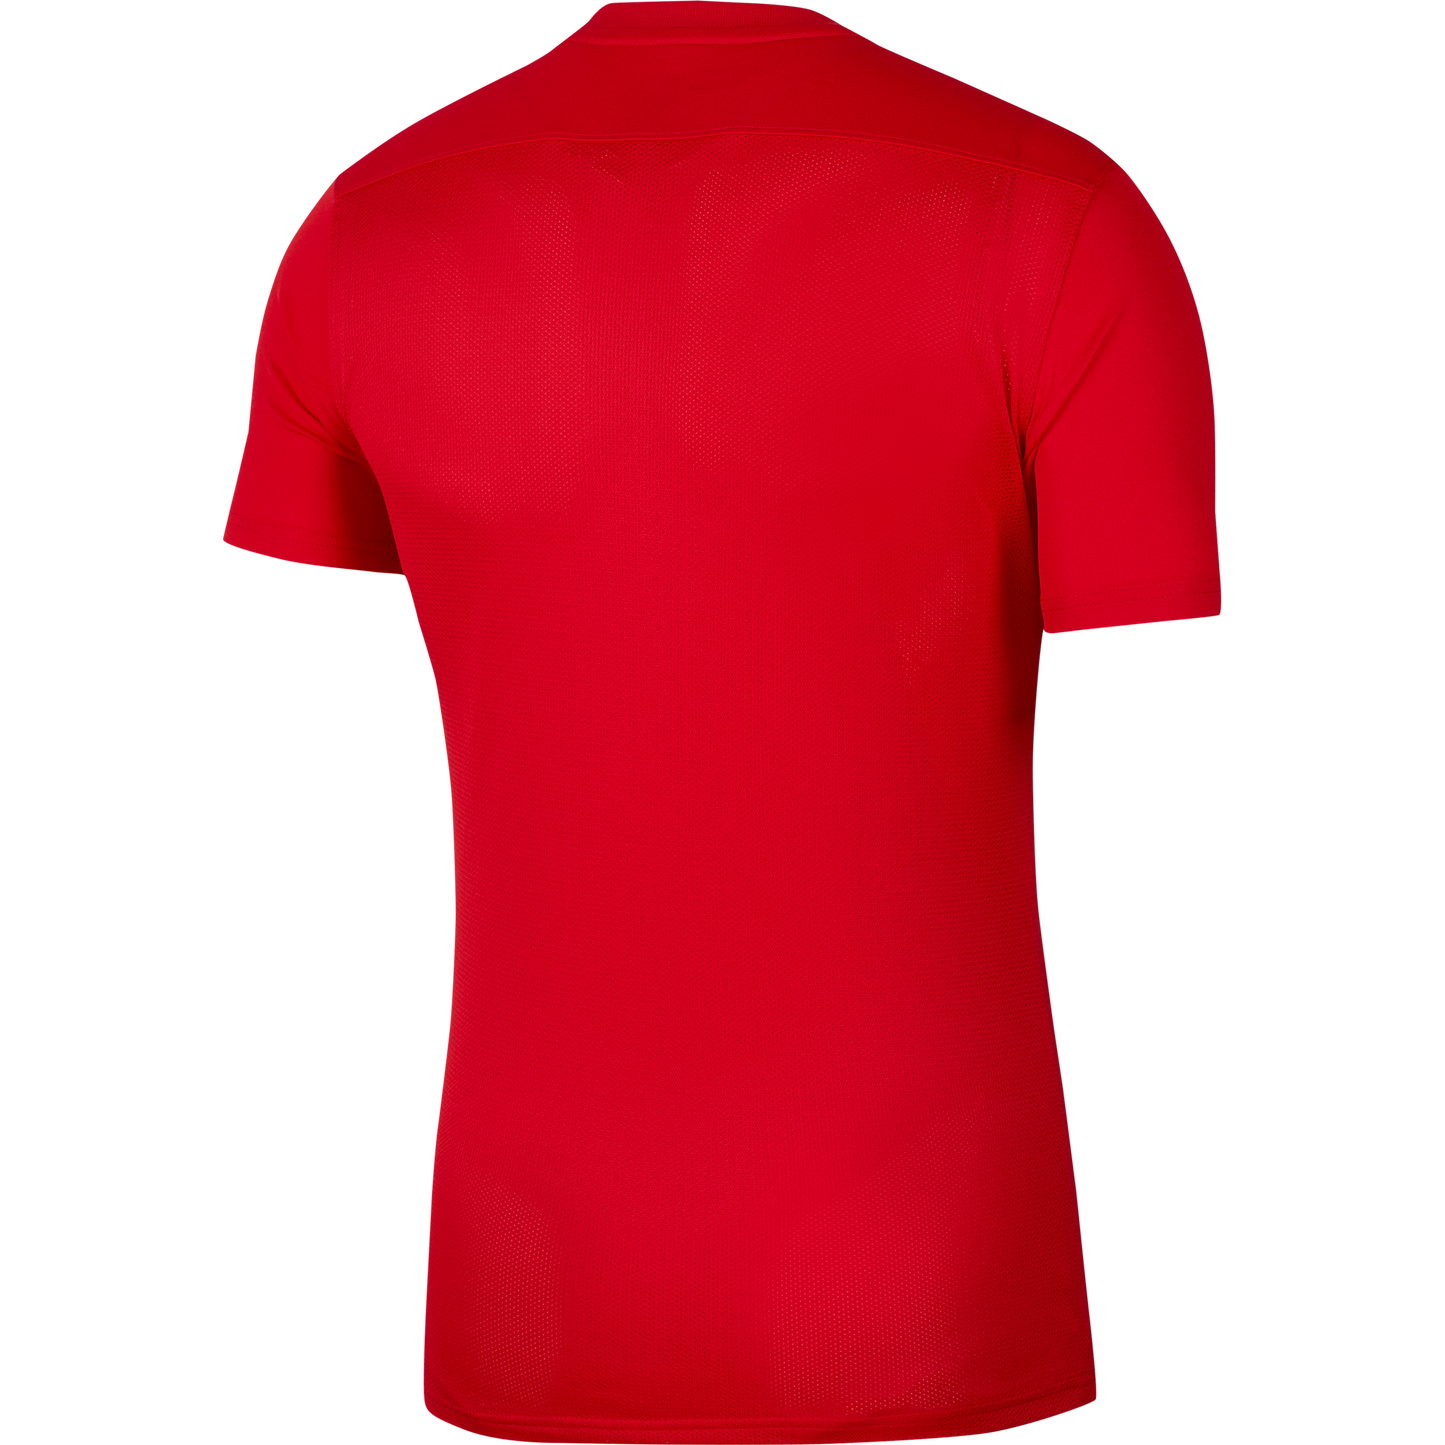 SOUTHERN DRAGONS NIKE PARK VII RED JERSEY - MEN'S